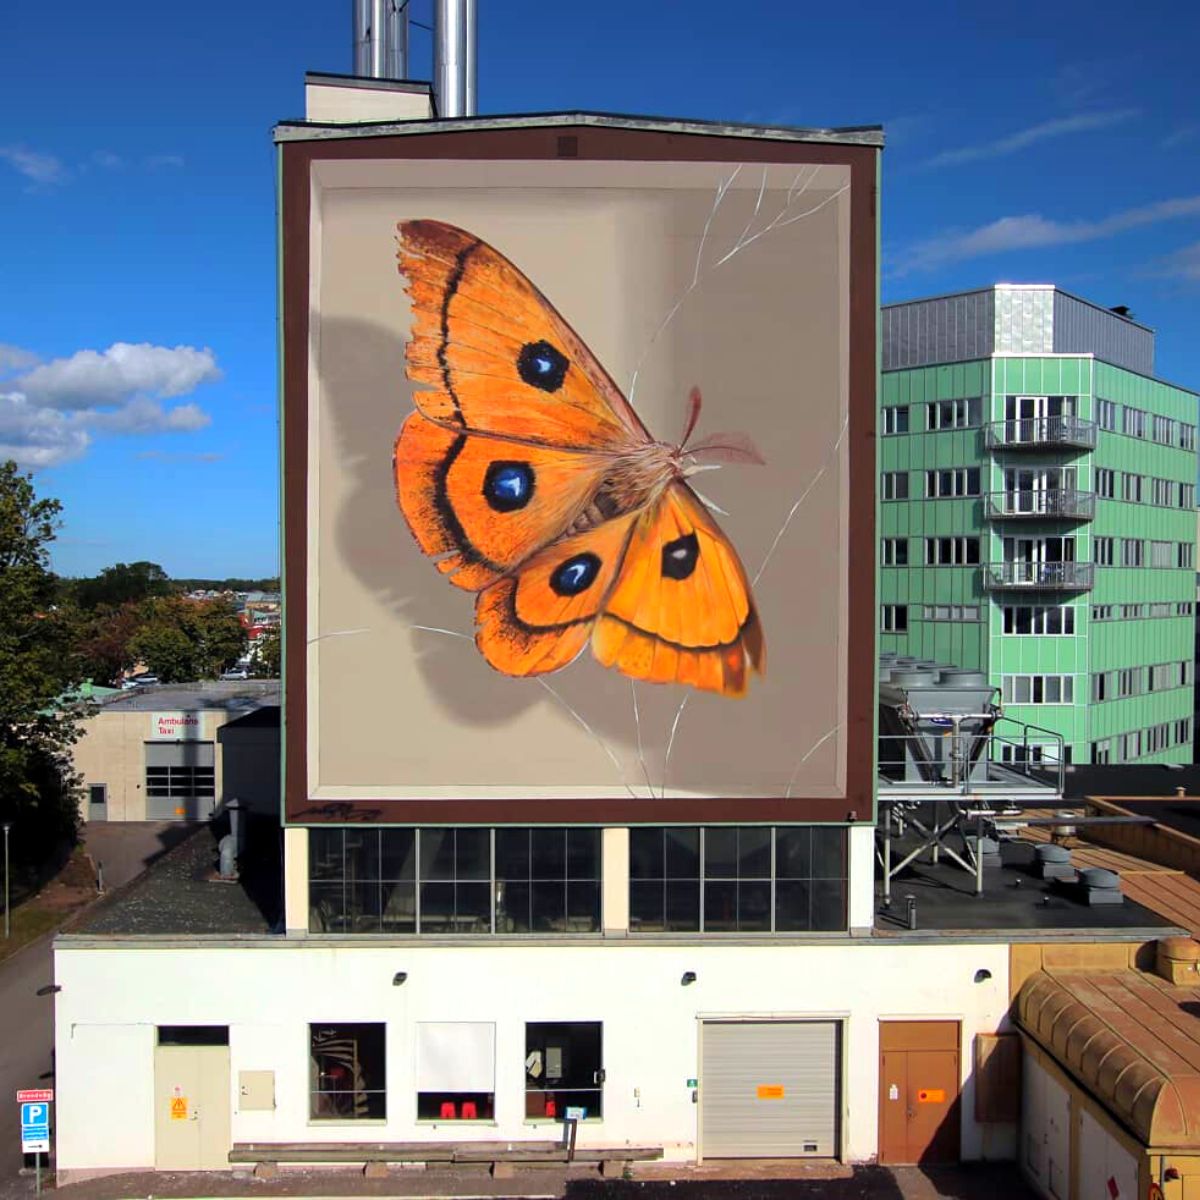 Mantra paints butterfly murals around the world